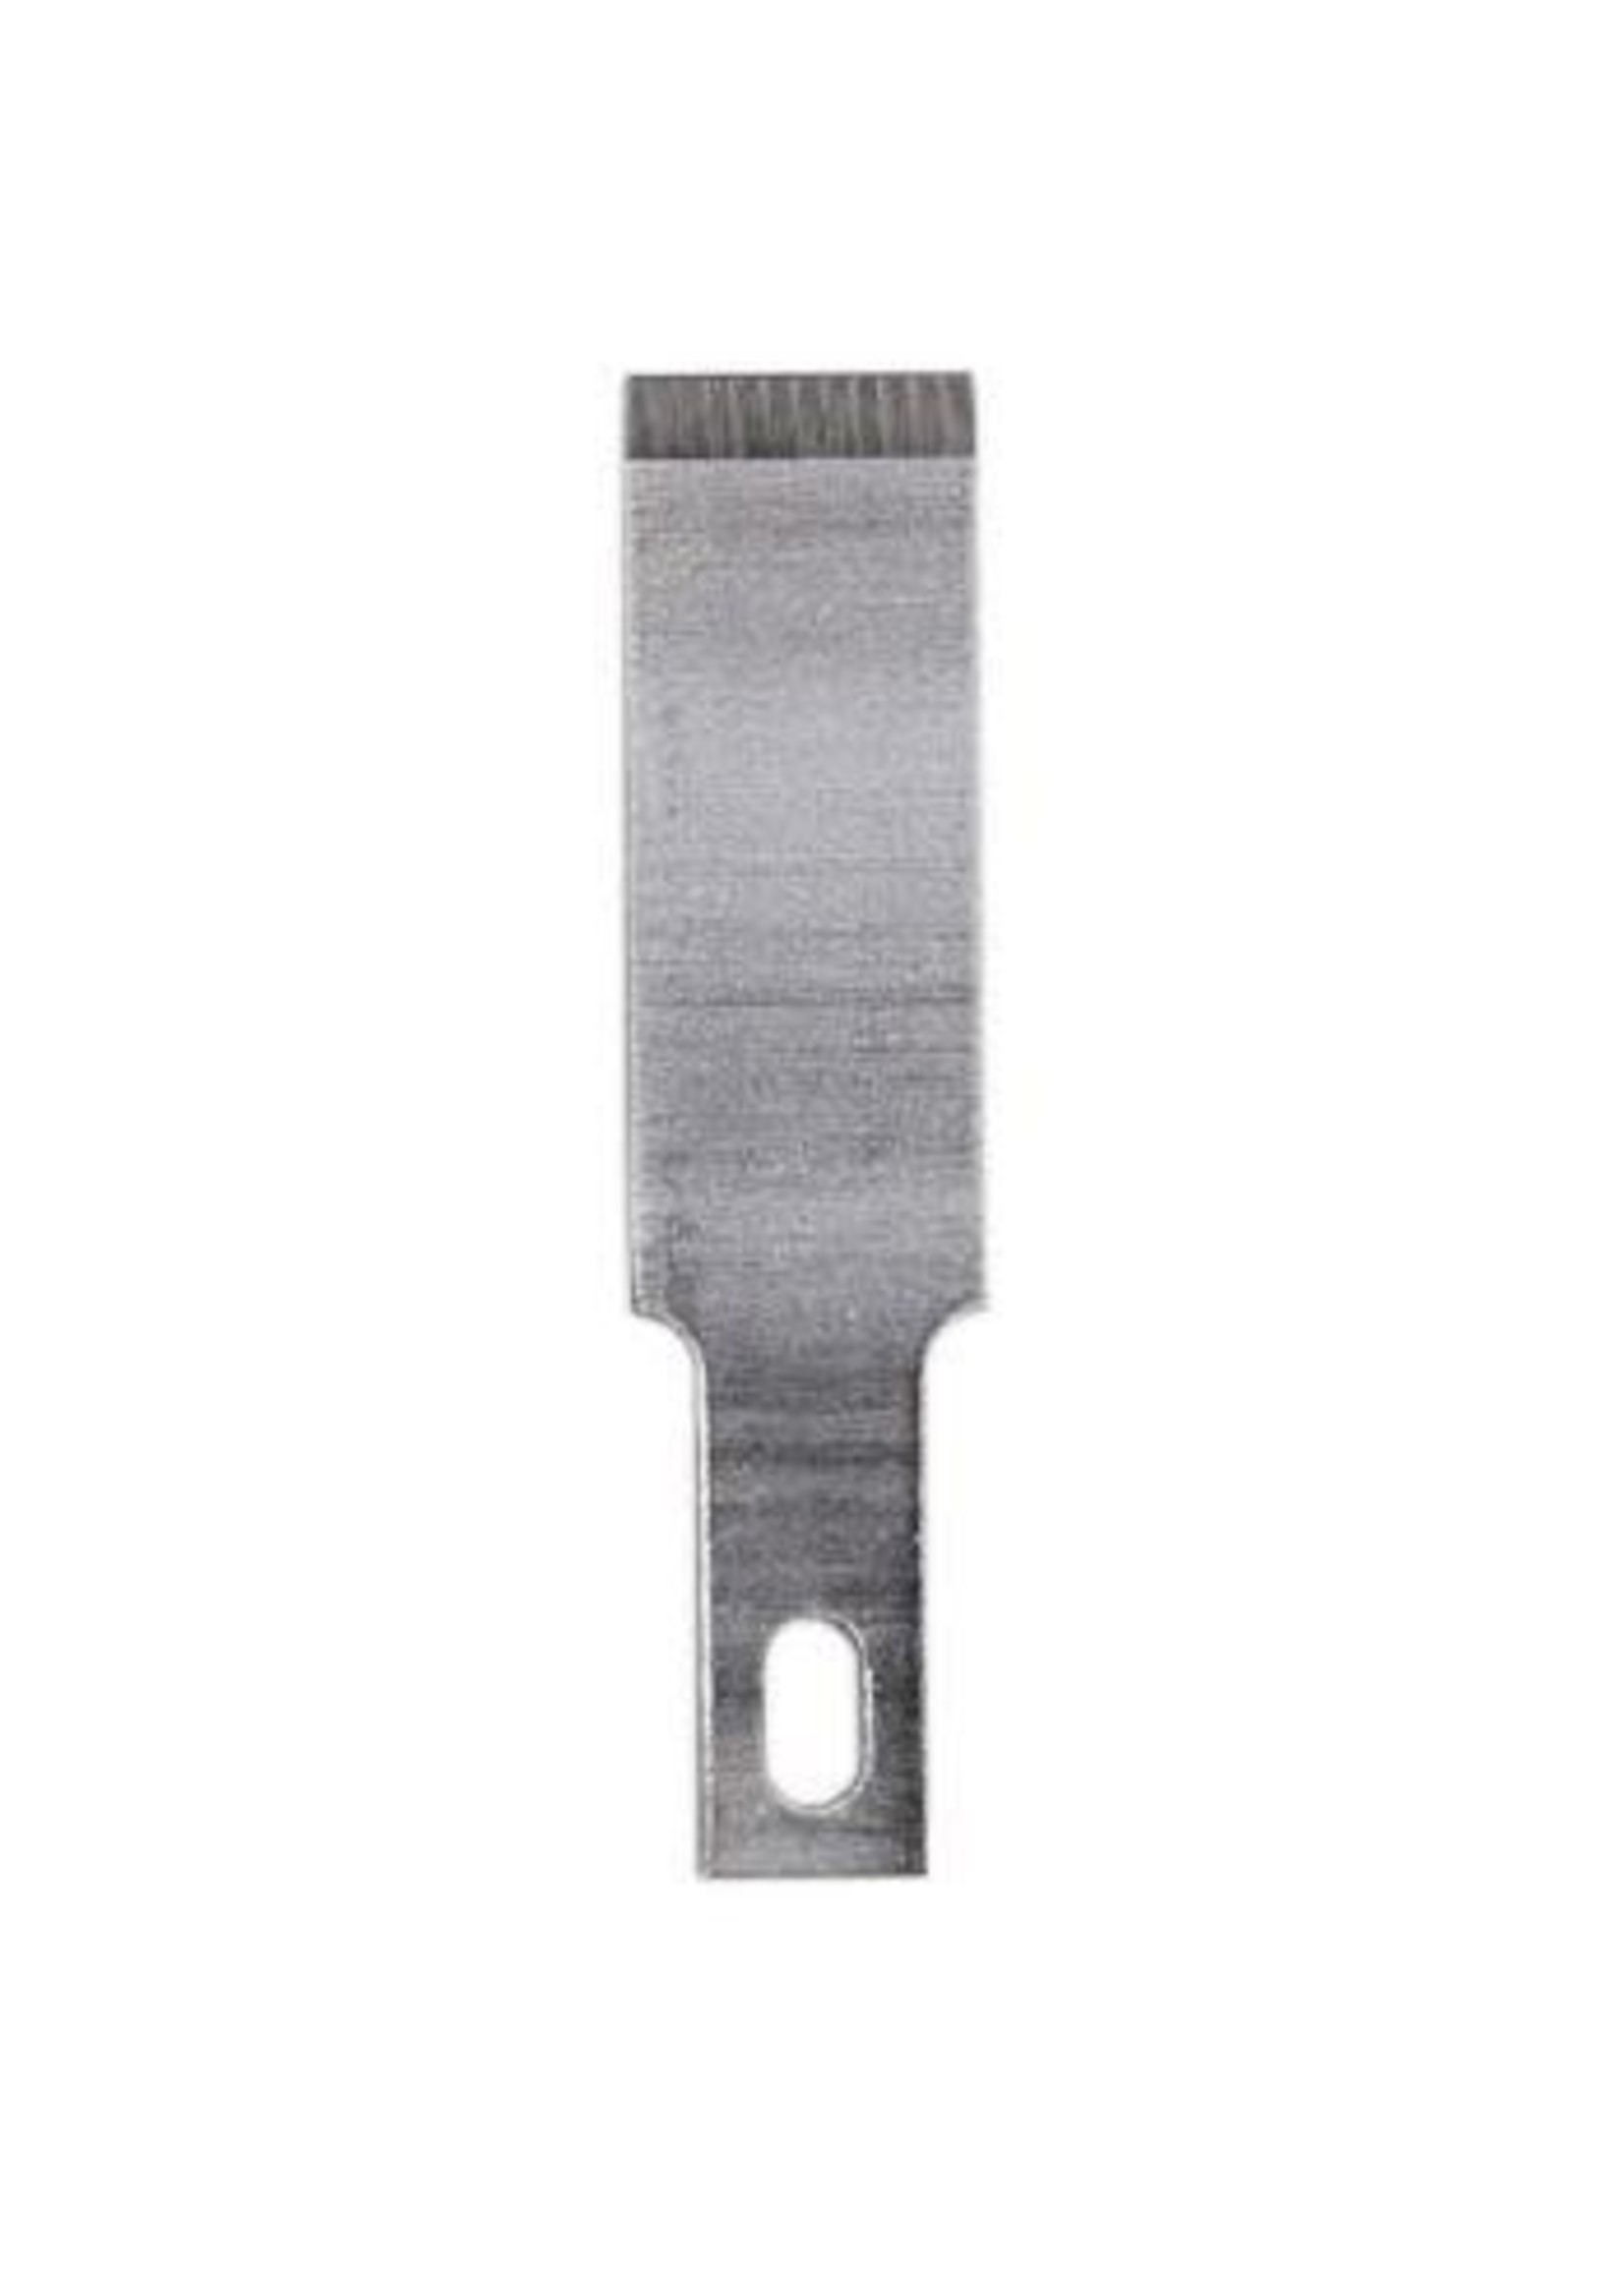 Excel Blade 17 - chisel edge (by 5)